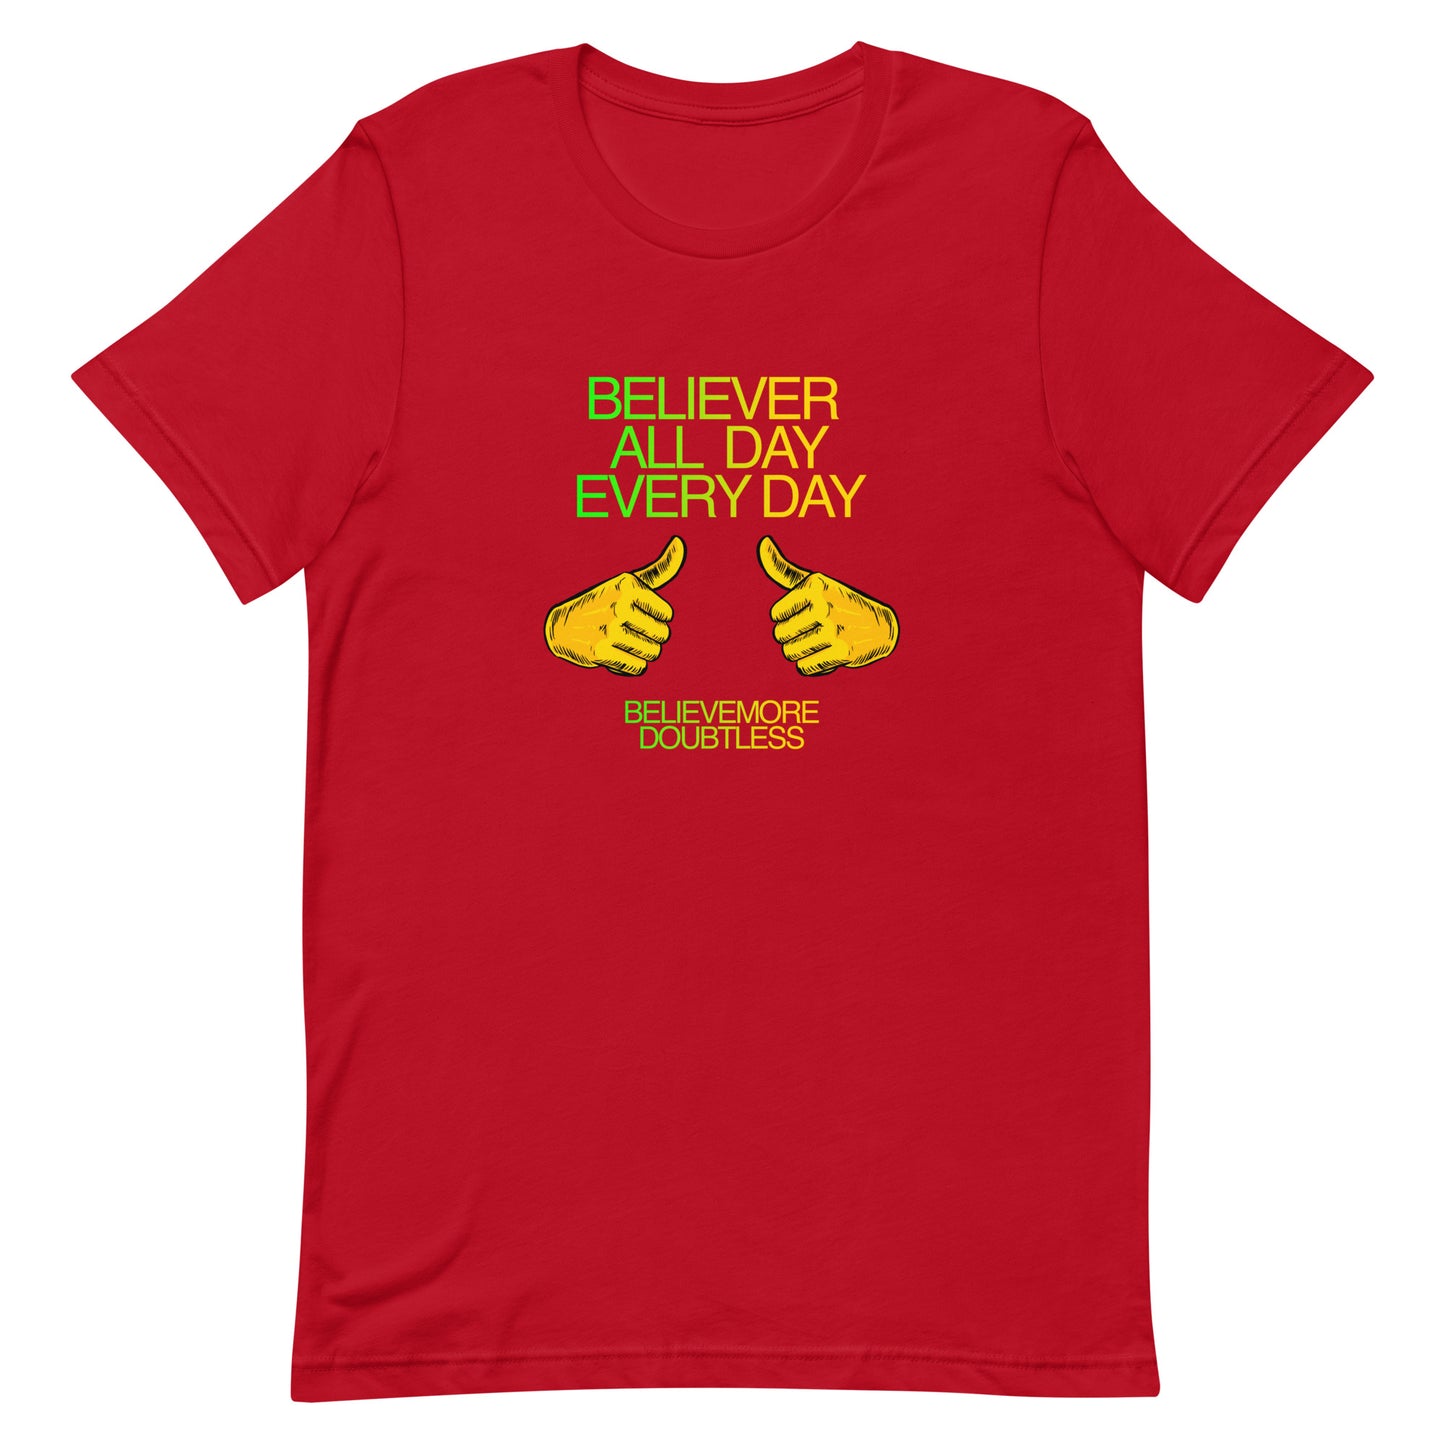 Believer All Day Everyday T-Shirt